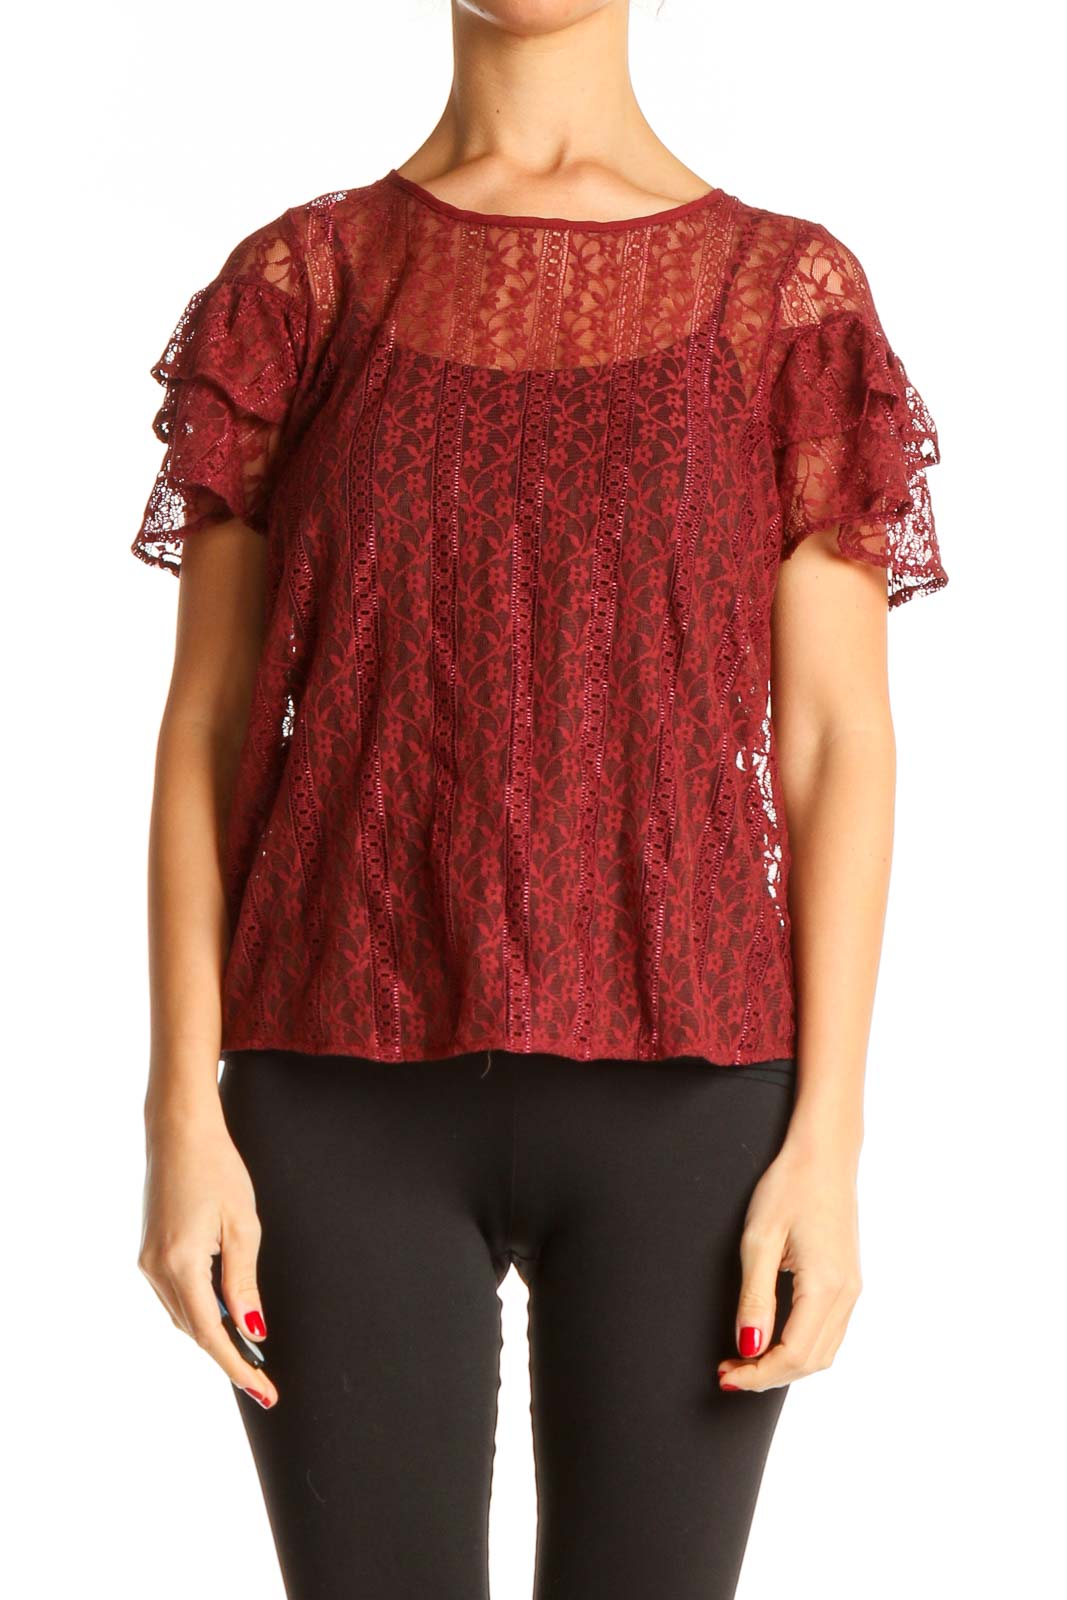 Red Lace Chic Blouse Front